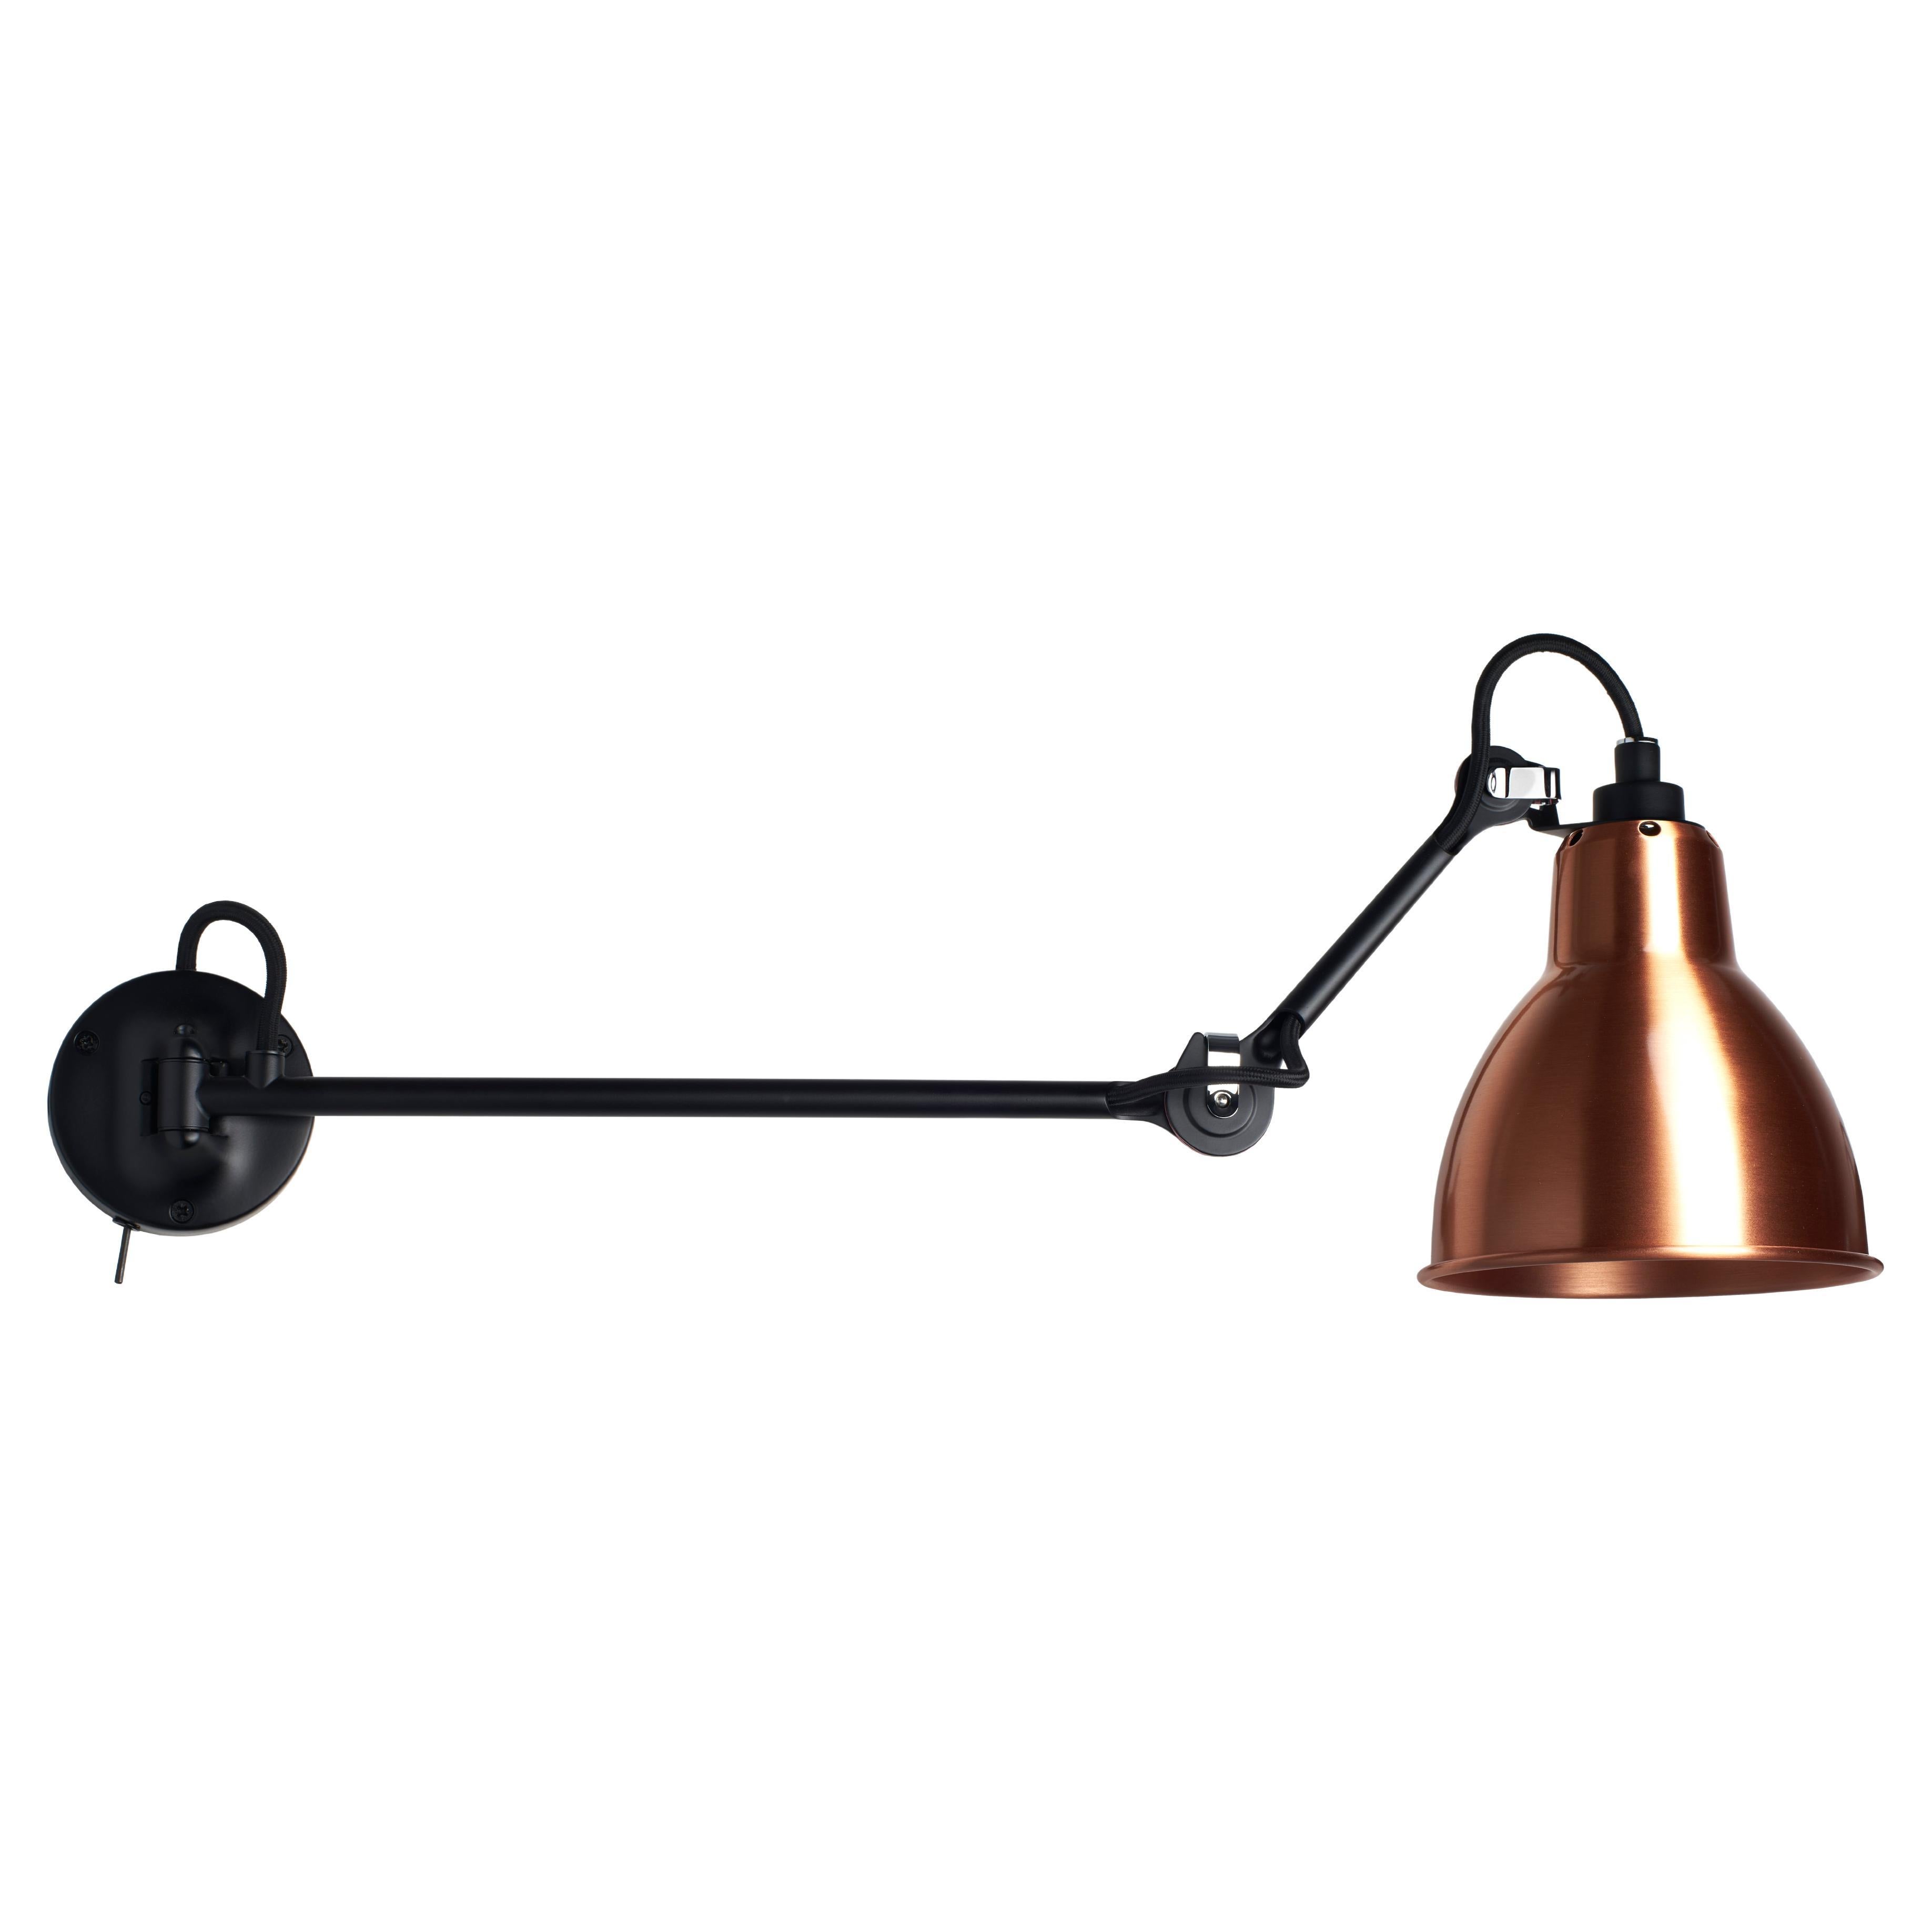 DCW Editions La Lampe Gras N°204 L40 SW Wall Lamp in Black Arm & Copper Shade For Sale